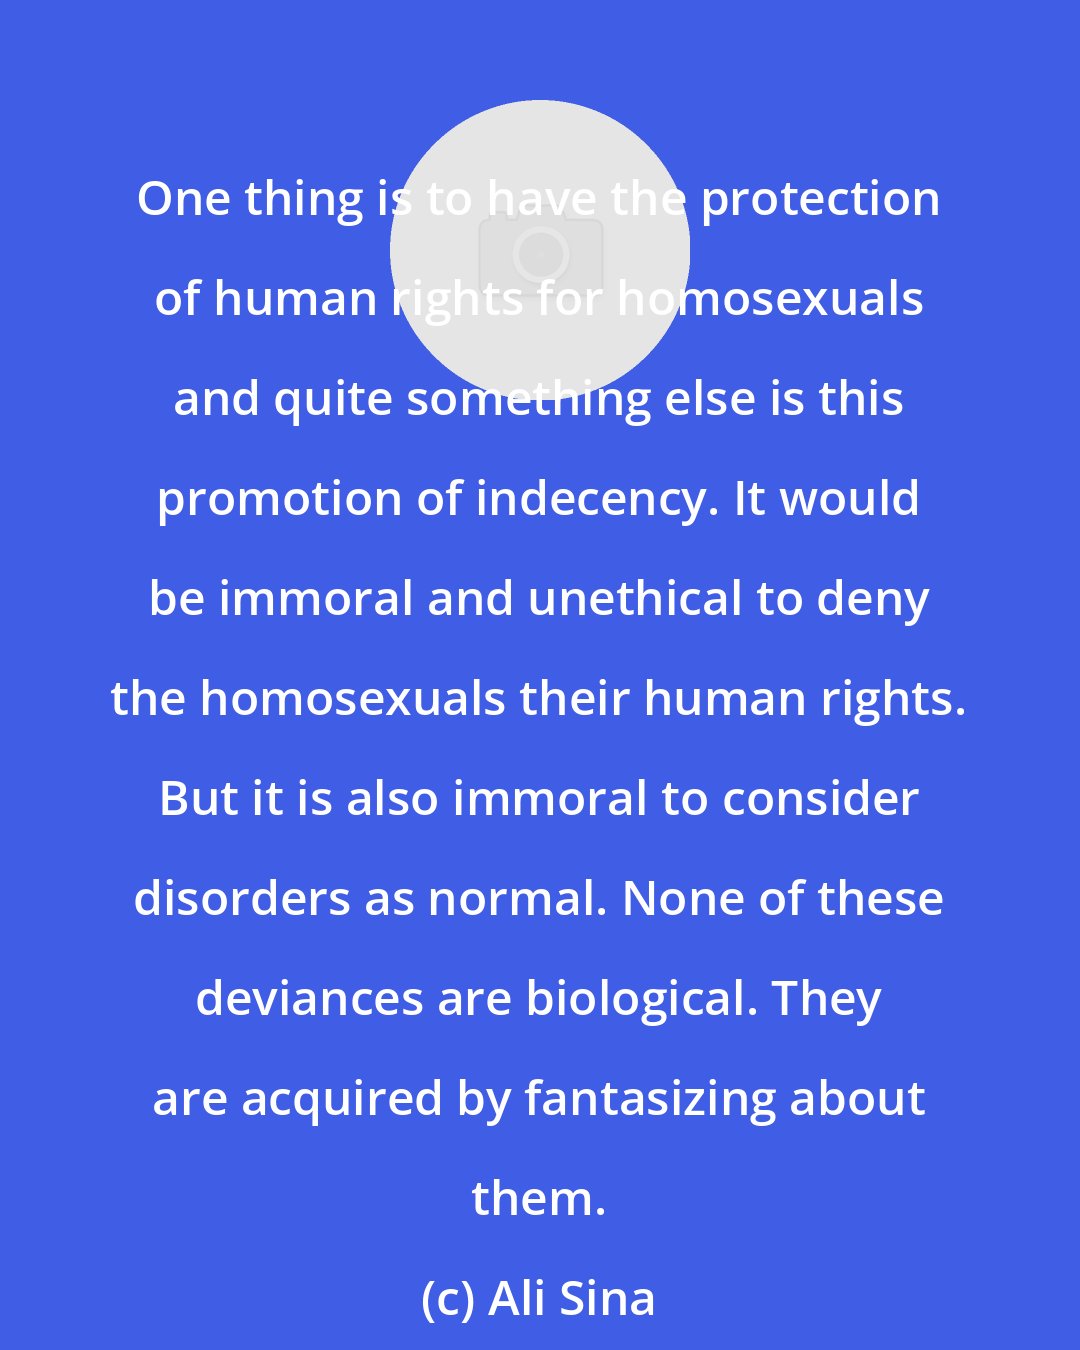 Ali Sina: One thing is to have the protection of human rights for homosexuals and quite something else is this promotion of indecency. It would be immoral and unethical to deny the homosexuals their human rights. But it is also immoral to consider disorders as normal. None of these deviances are biological. They are acquired by fantasizing about them.